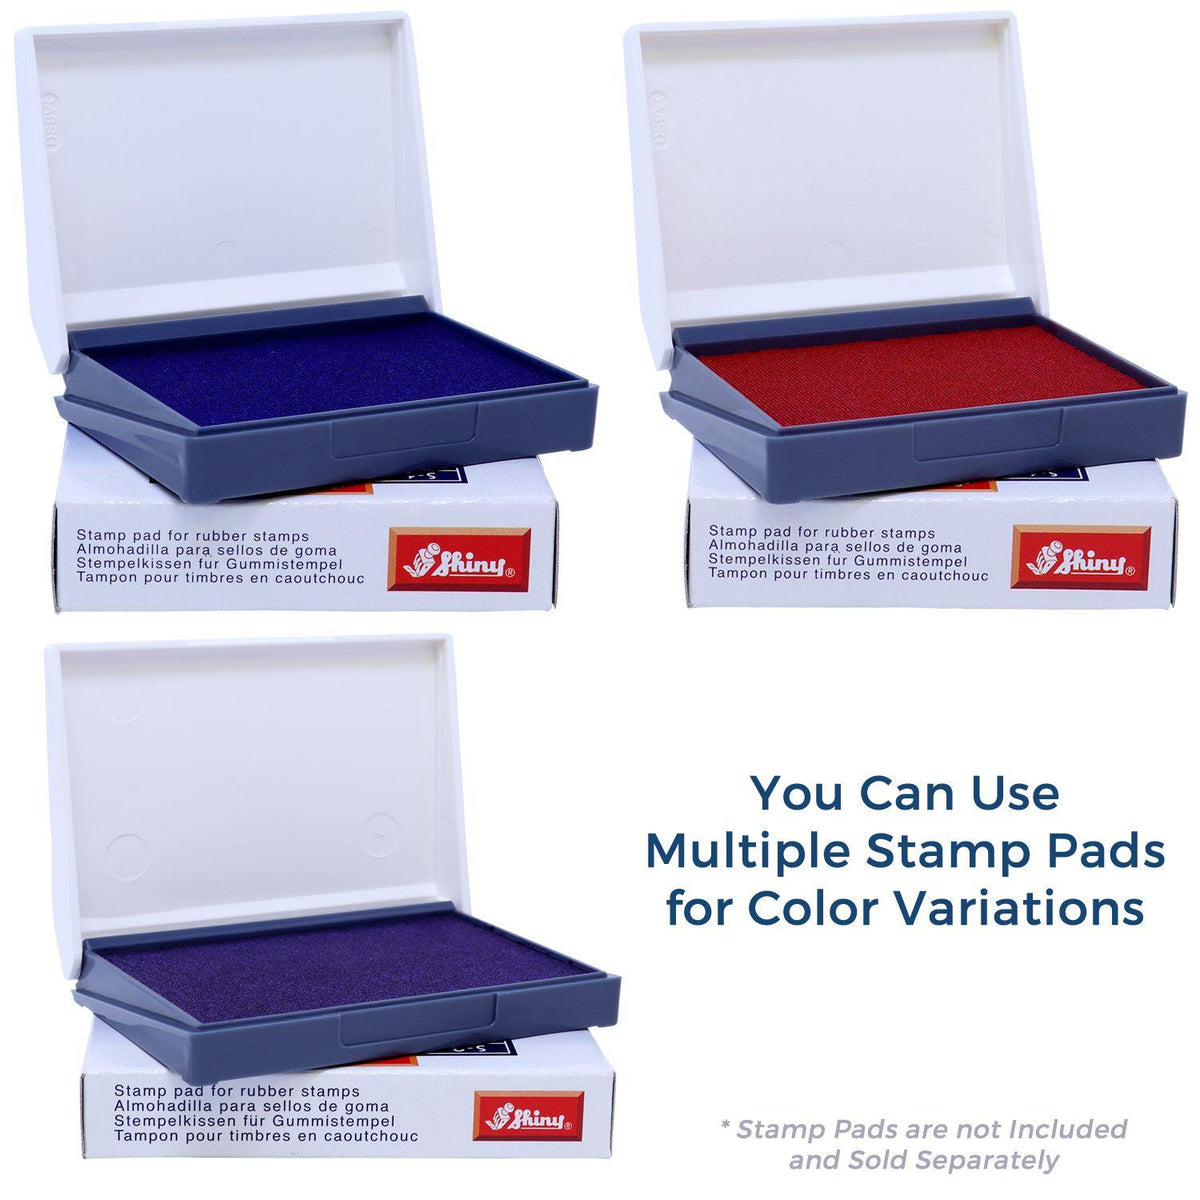 Stamp Pads for Large Of Rubber Stamp Available